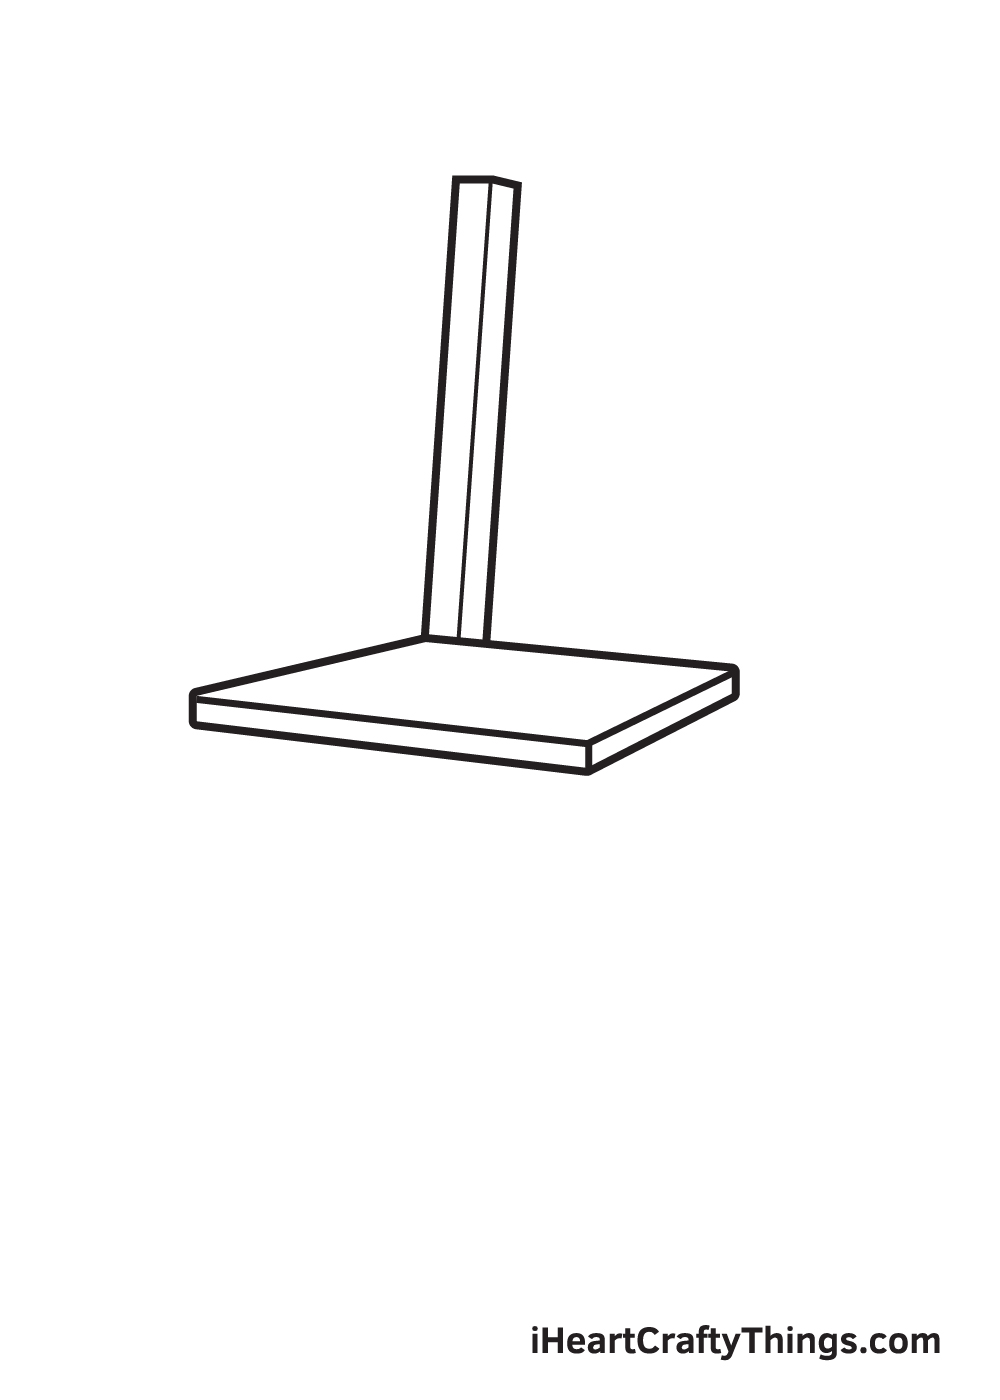 Drawing a chair - Step 2